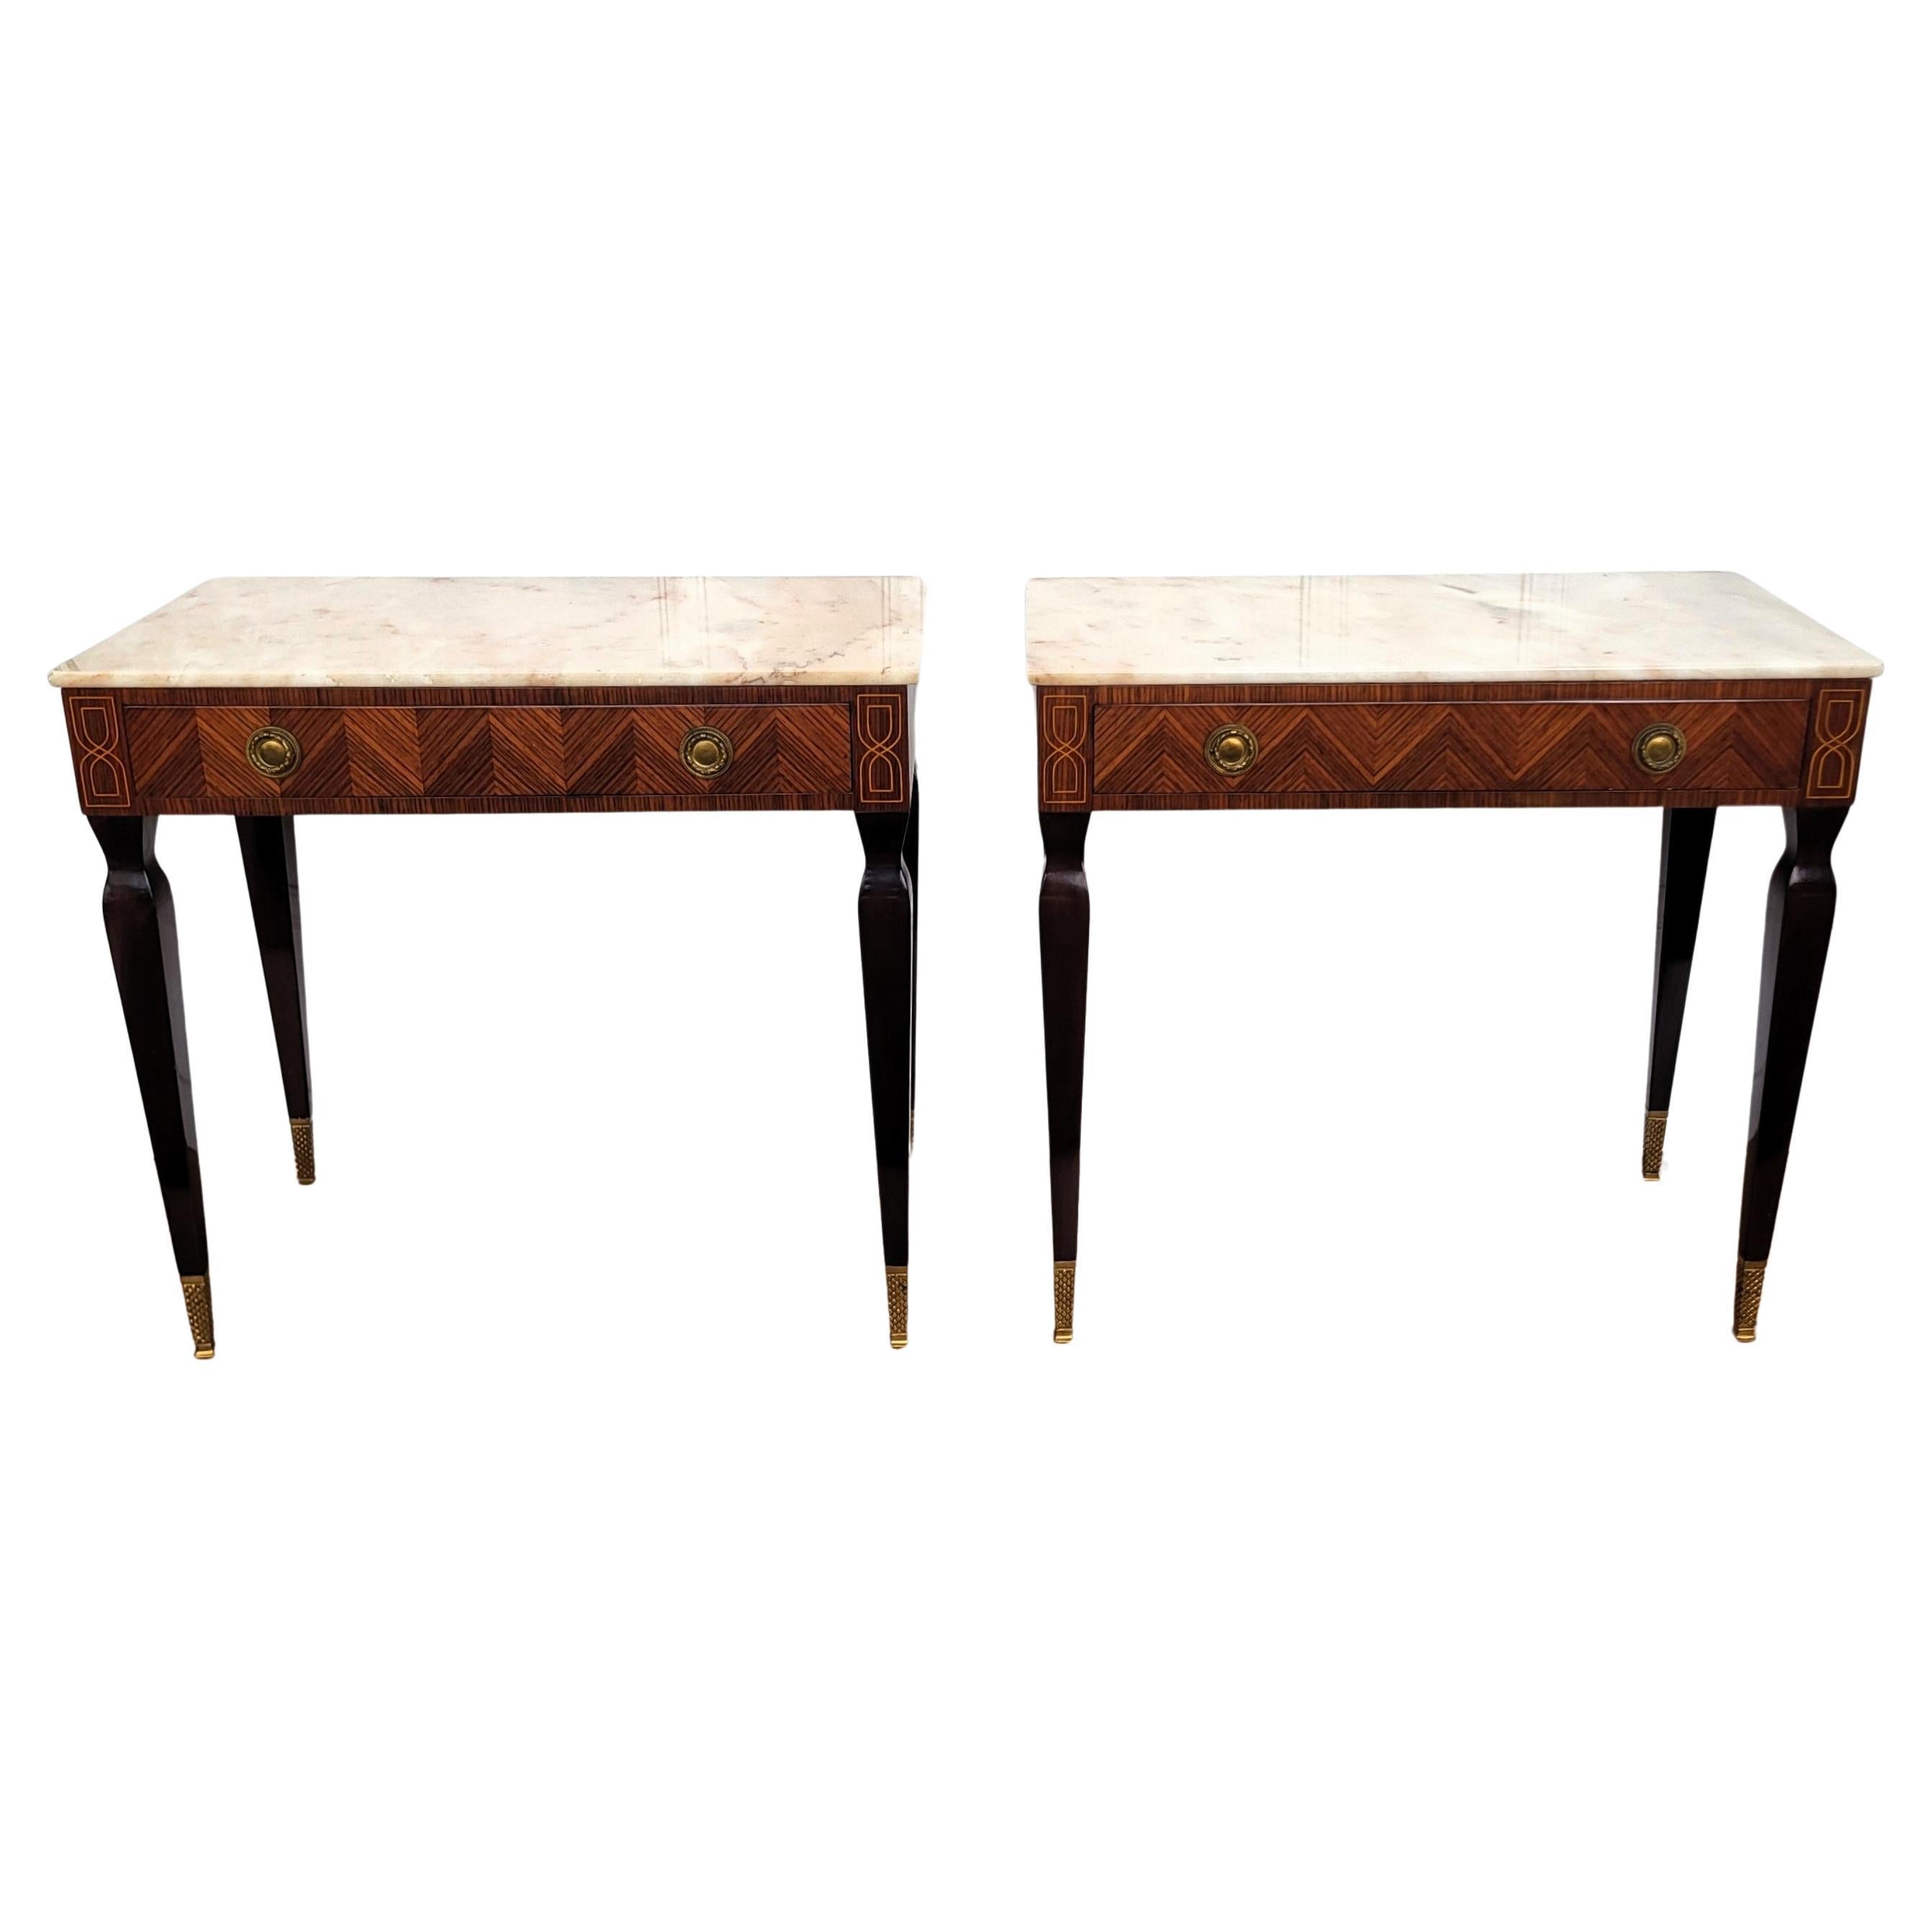 Pair of Italian Art Deco Marquetry Wood Marble Top Night Stands Bedside Tables For Sale